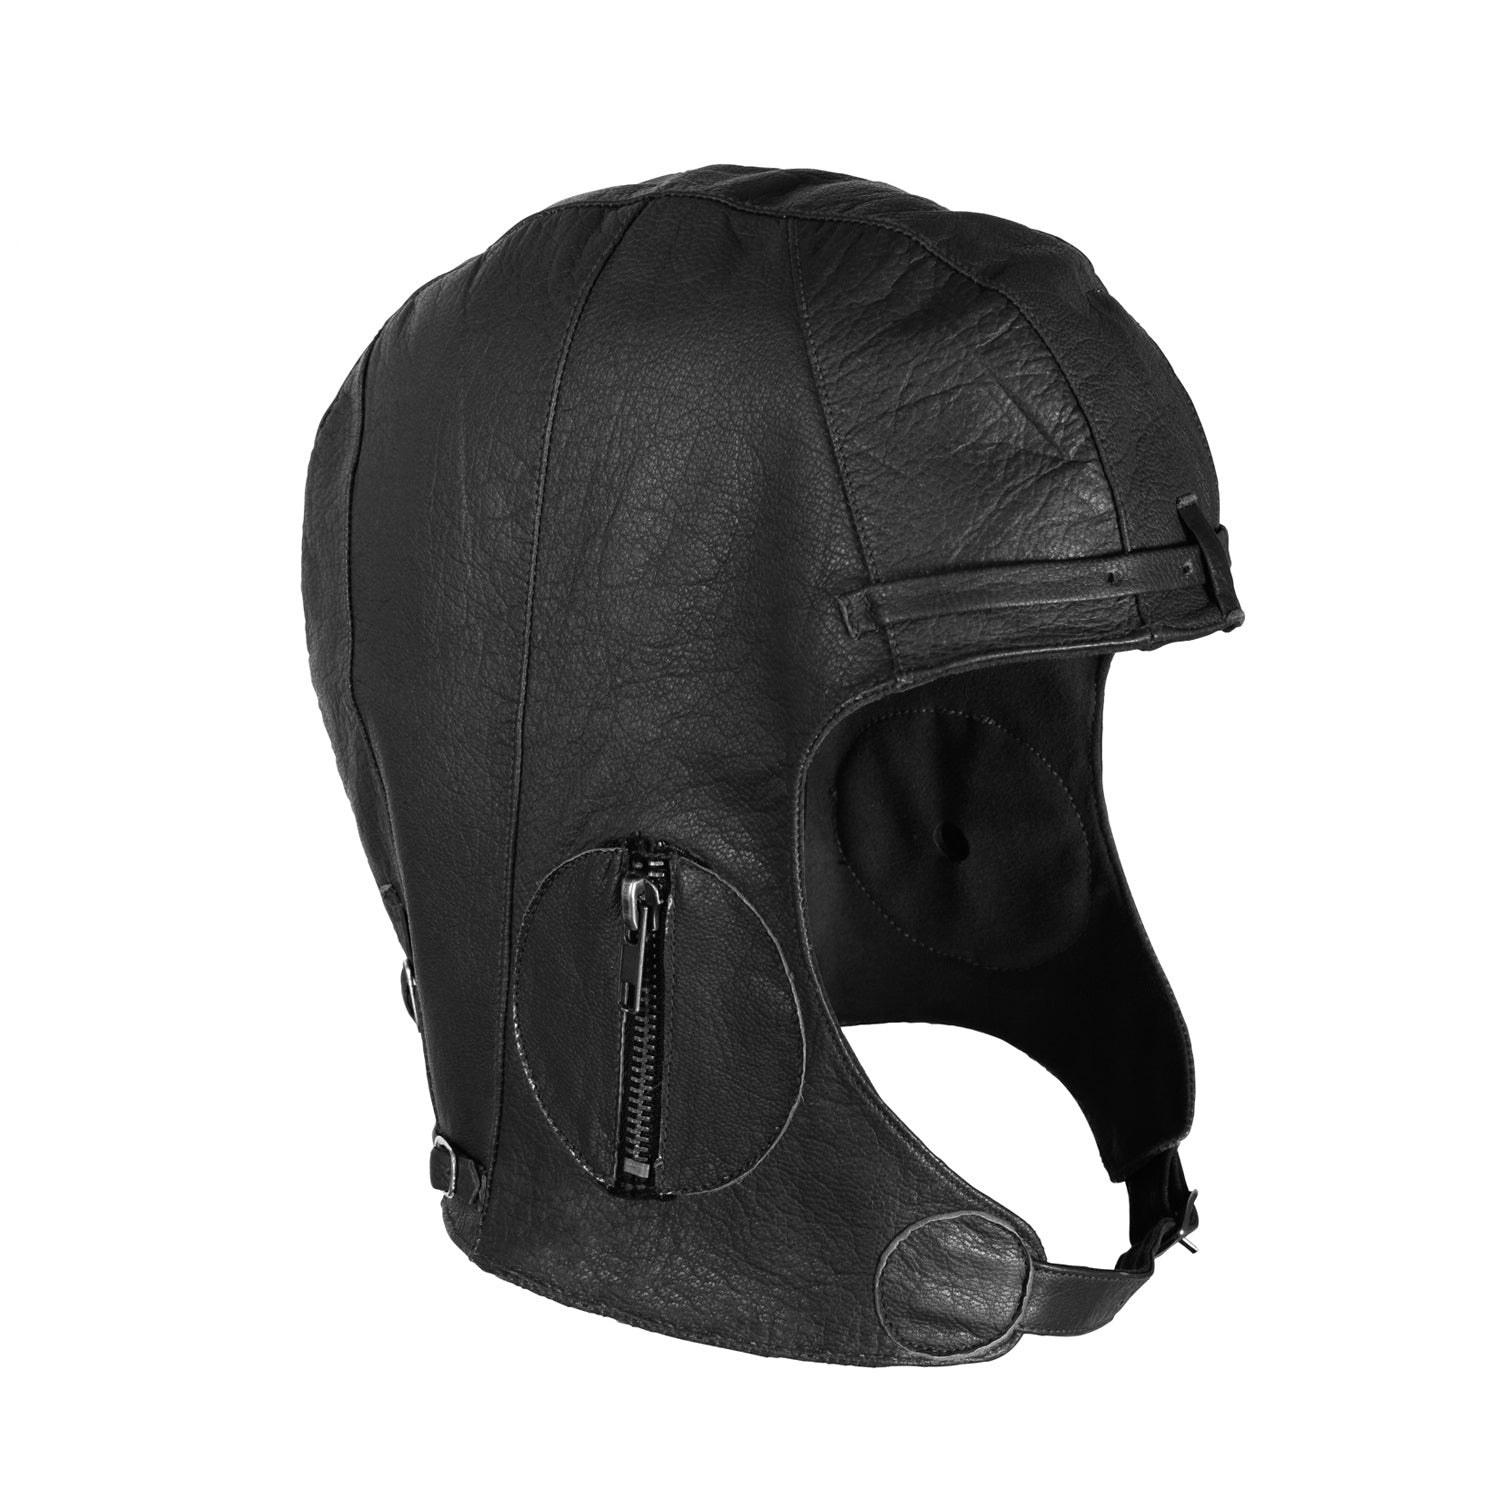 Rothco WWII Style Leather Pilots Helmet Black